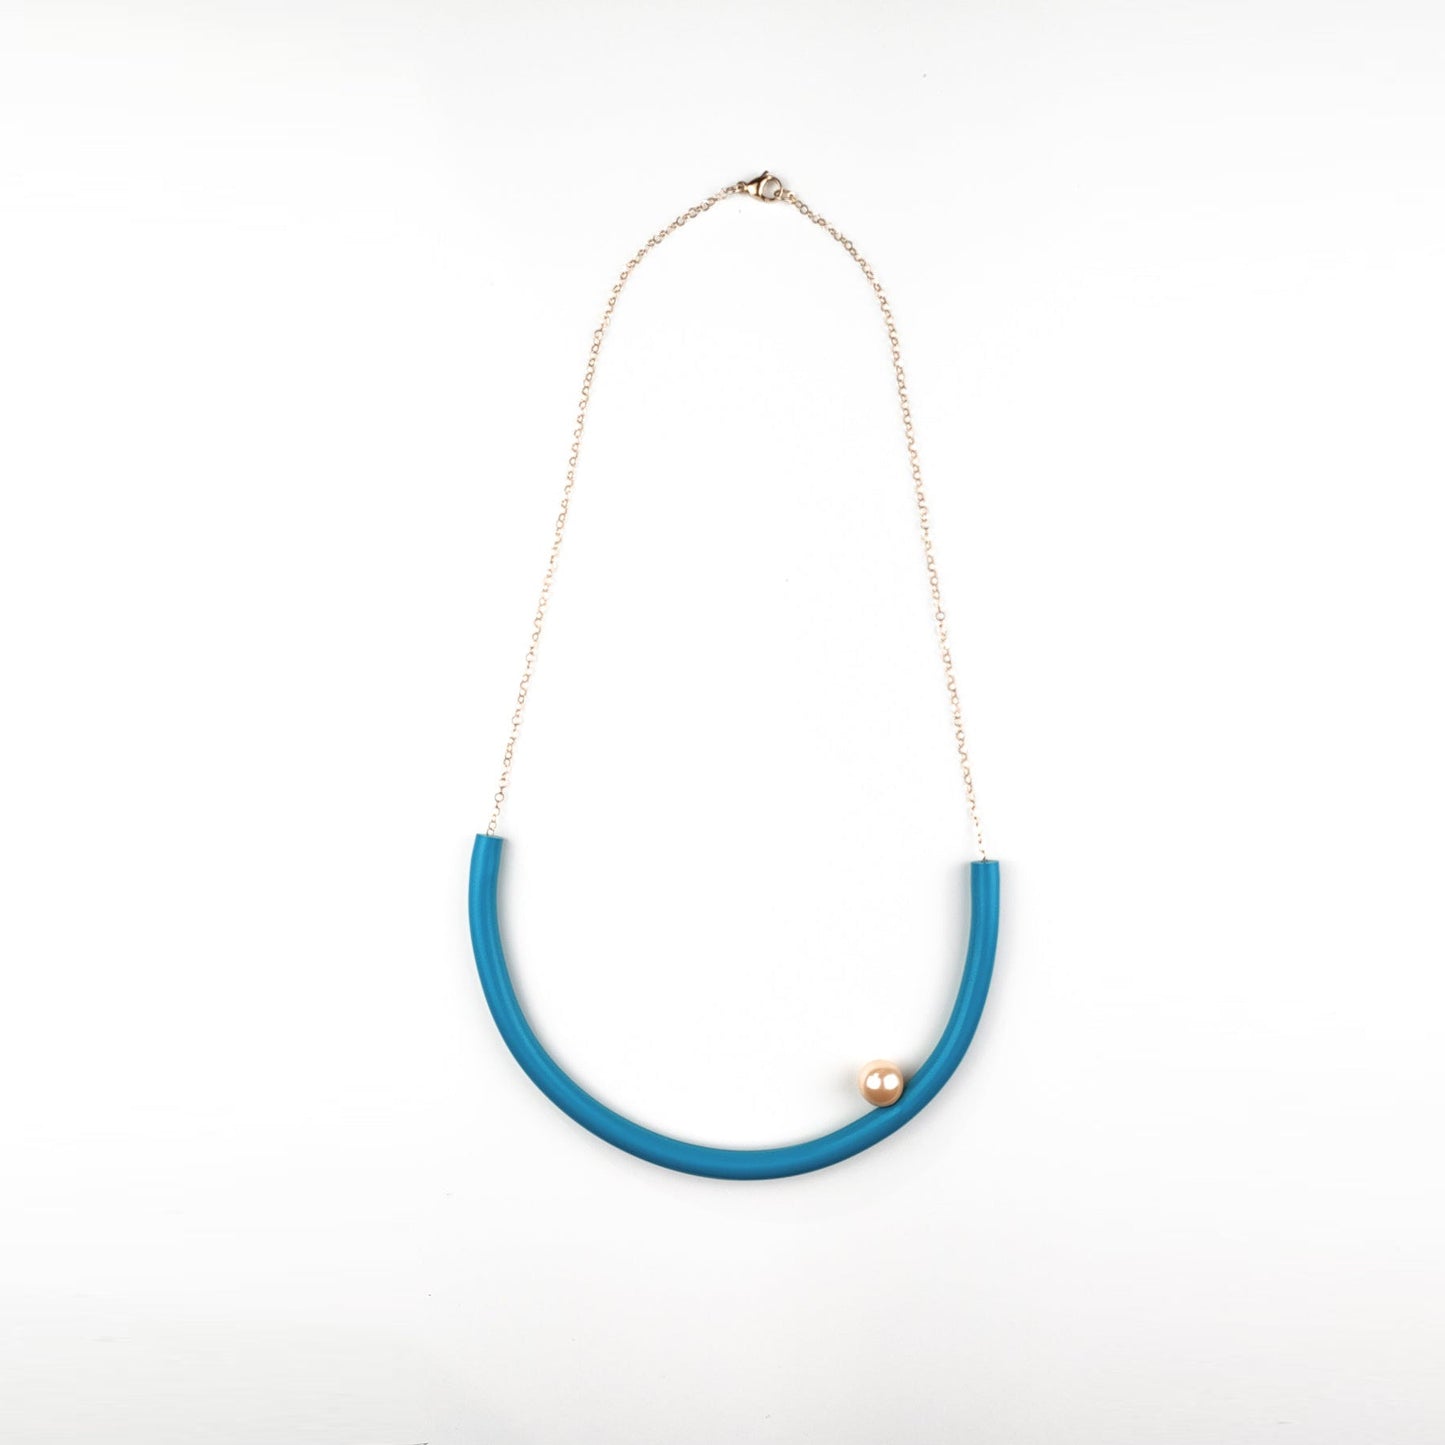 BILICO round necklace - teal color / light brown pearl